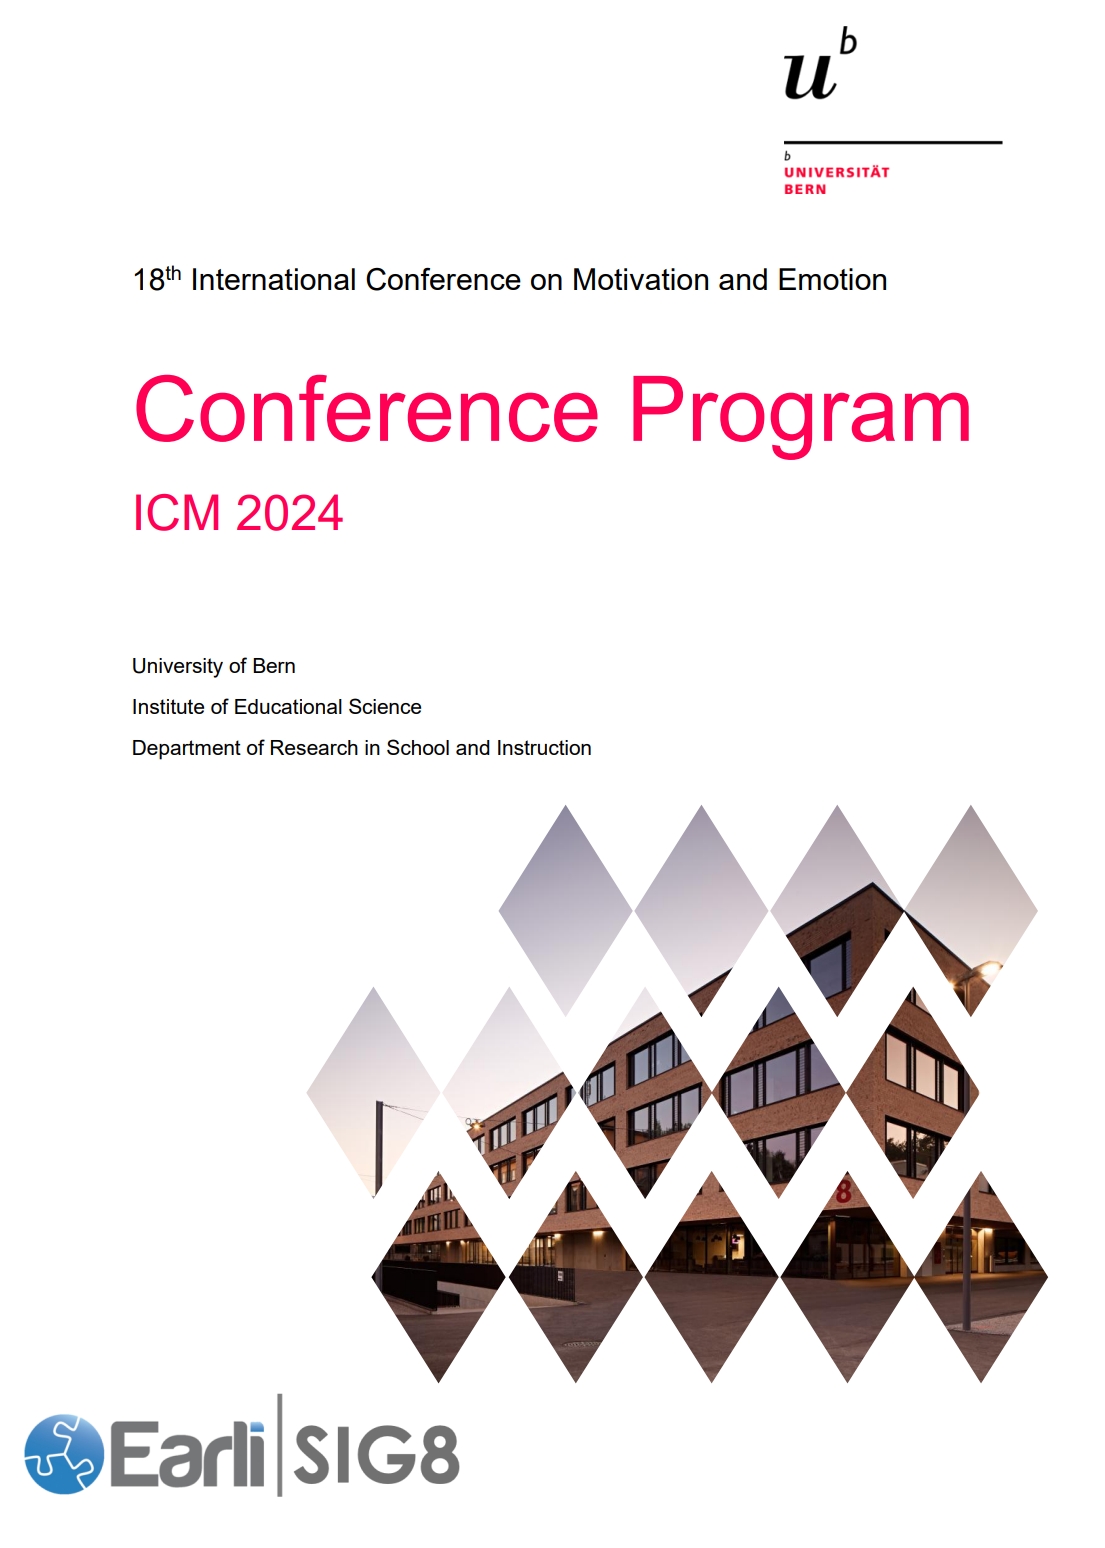 Conference Program Front Page